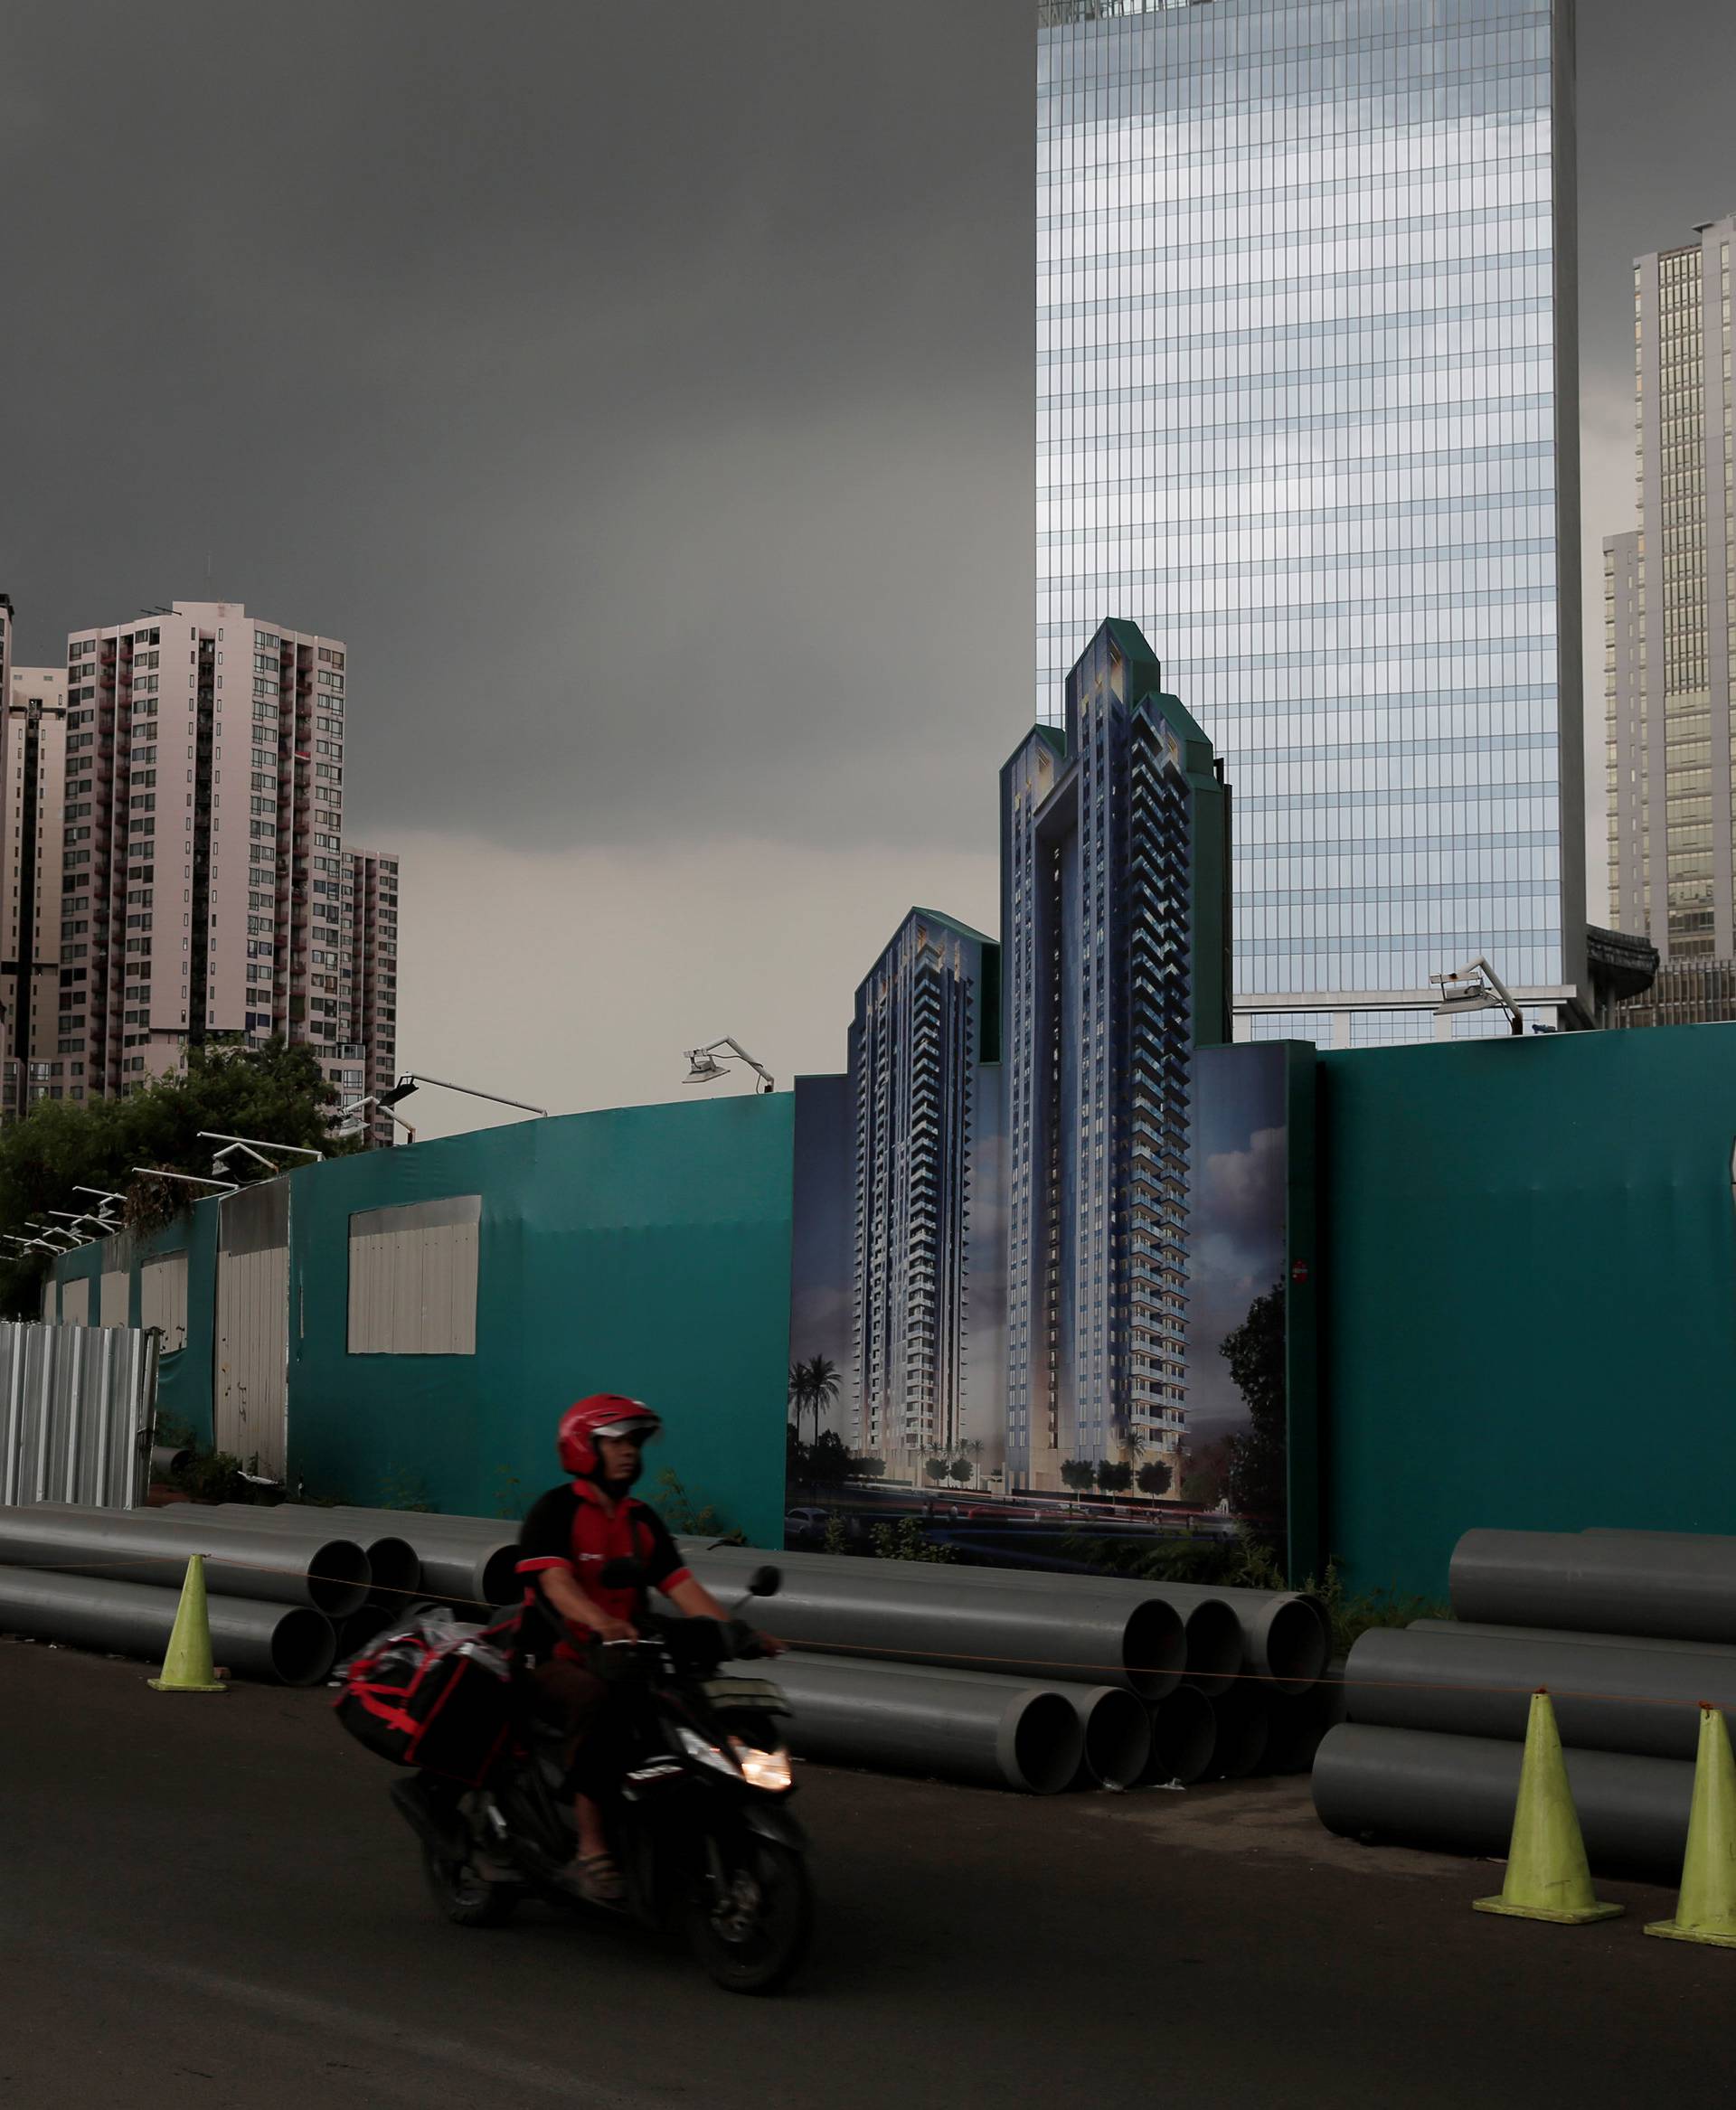 A man rides a motorcycle in front of an apartment advertisement at Kuningan apartment compound in Jakarta